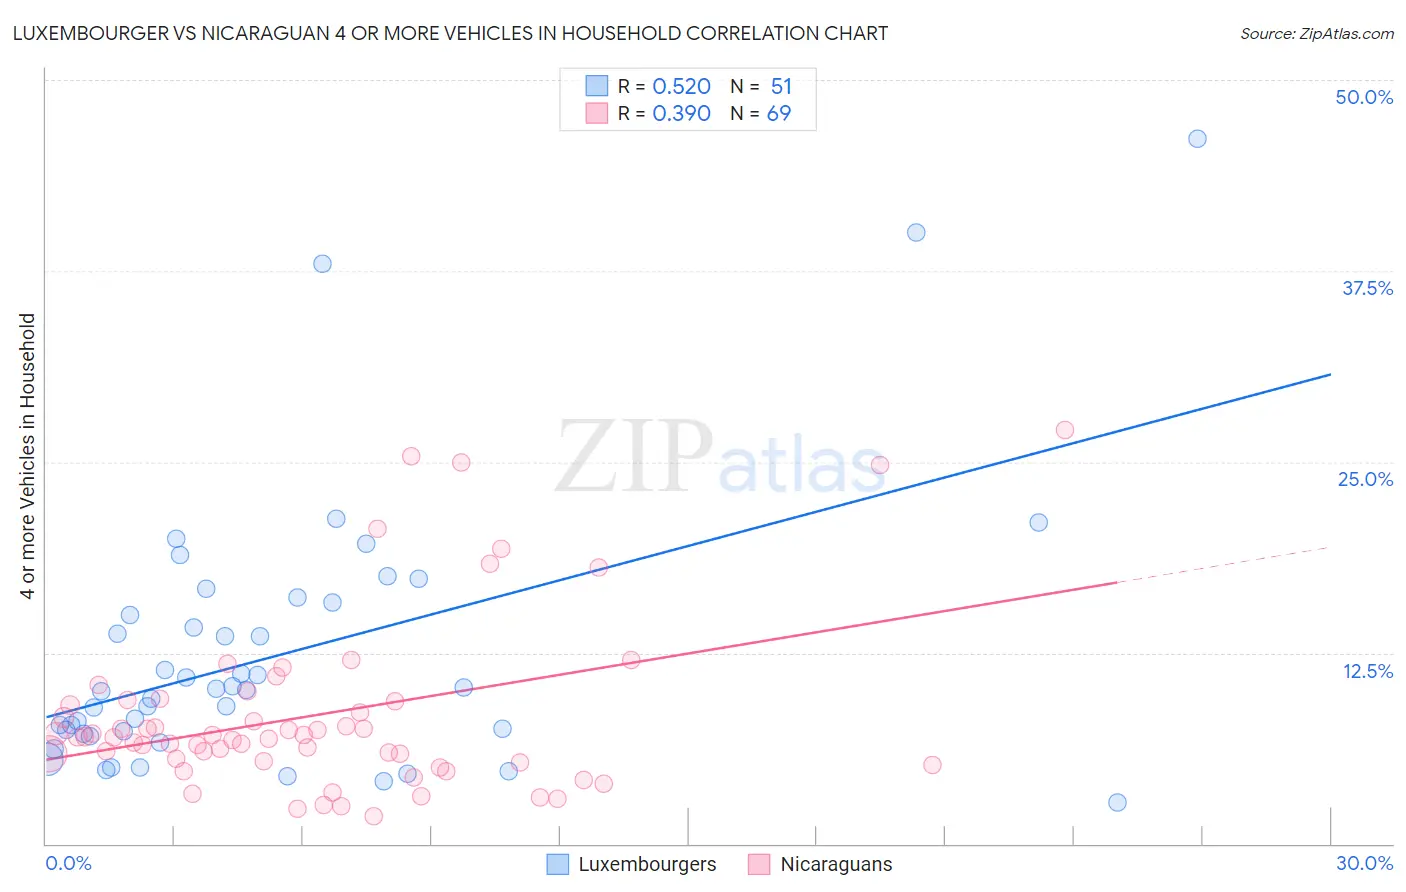 Luxembourger vs Nicaraguan 4 or more Vehicles in Household